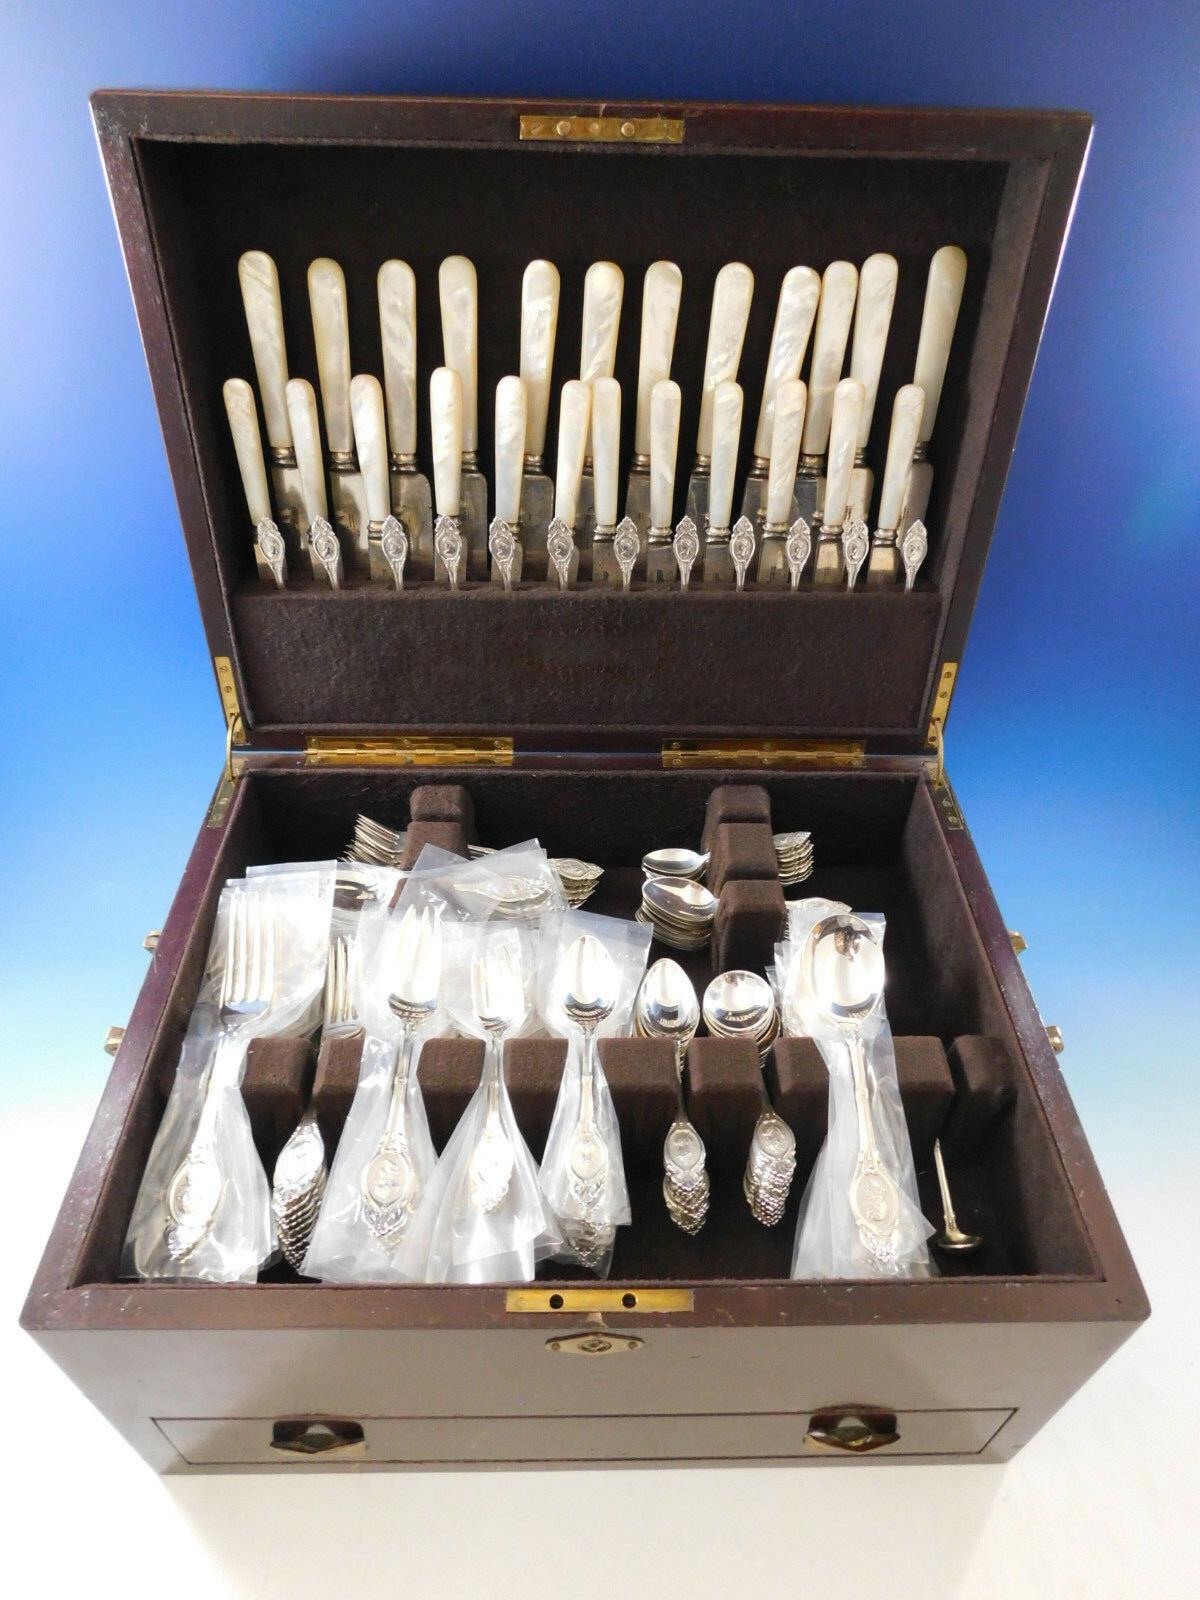 Incredible monumental dinner and Luncheon size medallion by John Polhamus/Shiebler circa 1865 sterling silver flatware set - 181 pieces. This set includes:

12 dinner size knives, mother of pearl handle, 10 1/2